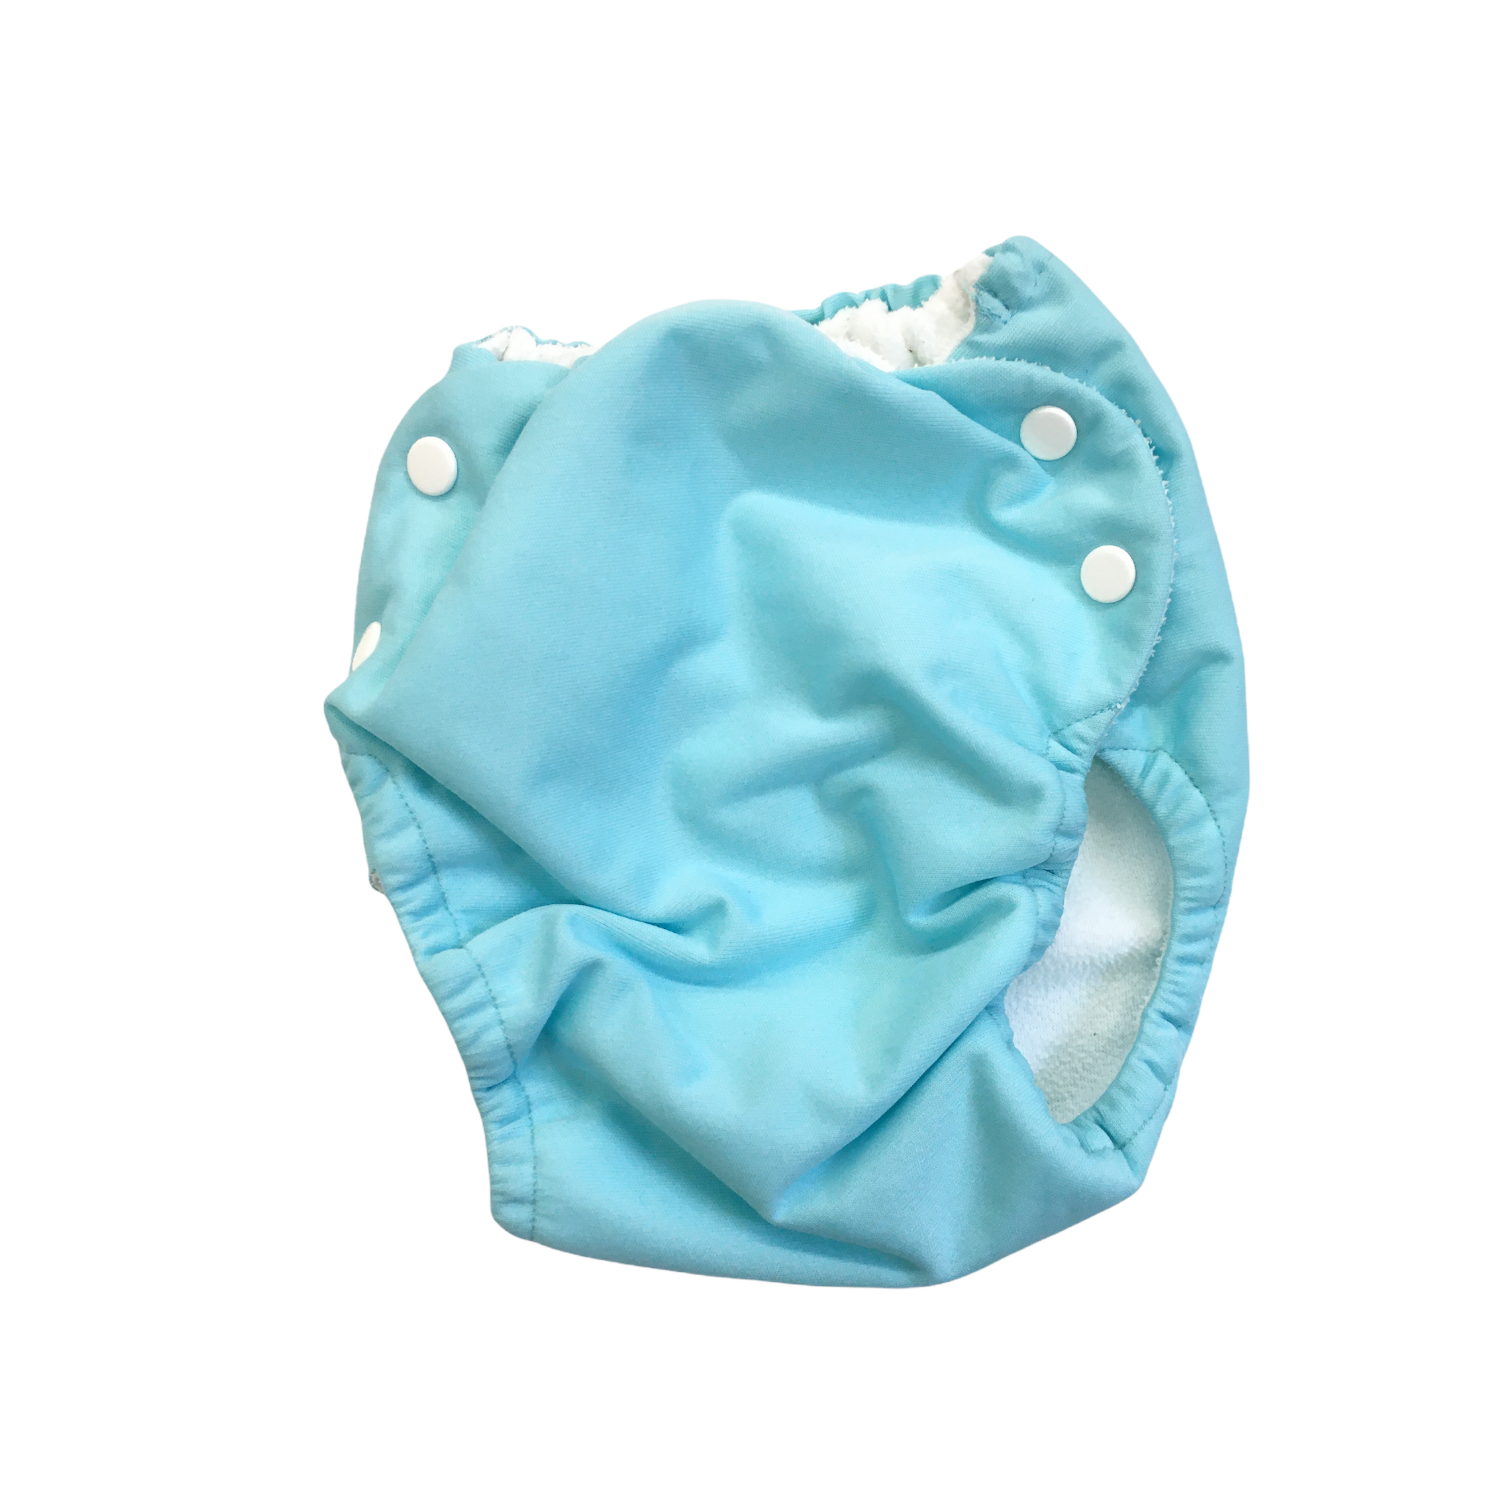 Blippi Cloth Diaper - Made to Order – Clover Cloth Creations